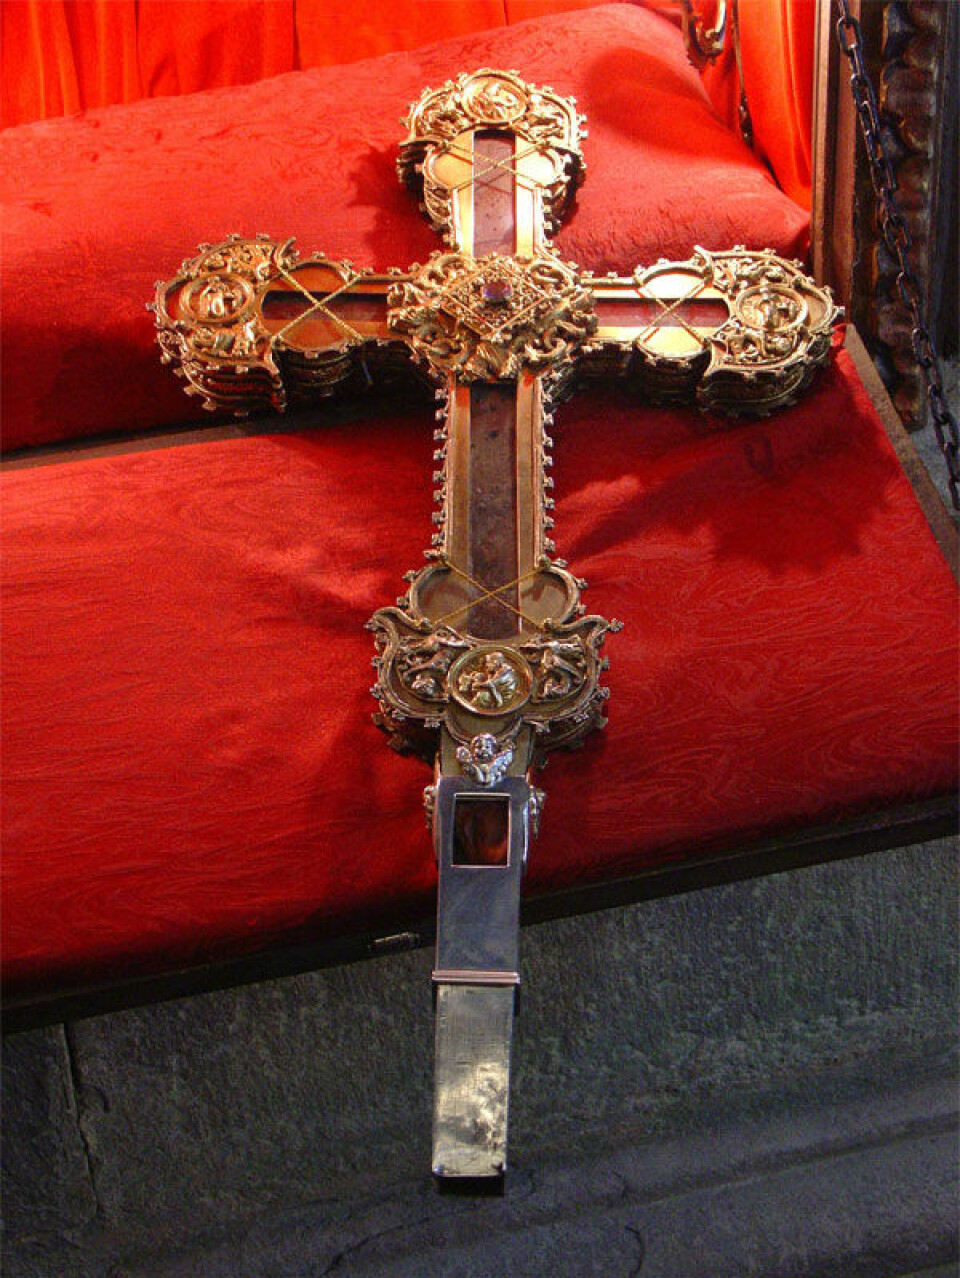 This cross also has two splinters from ‘The True Cross’ attached to it, but is not the same as the one to be used by King Charles during the coronation.